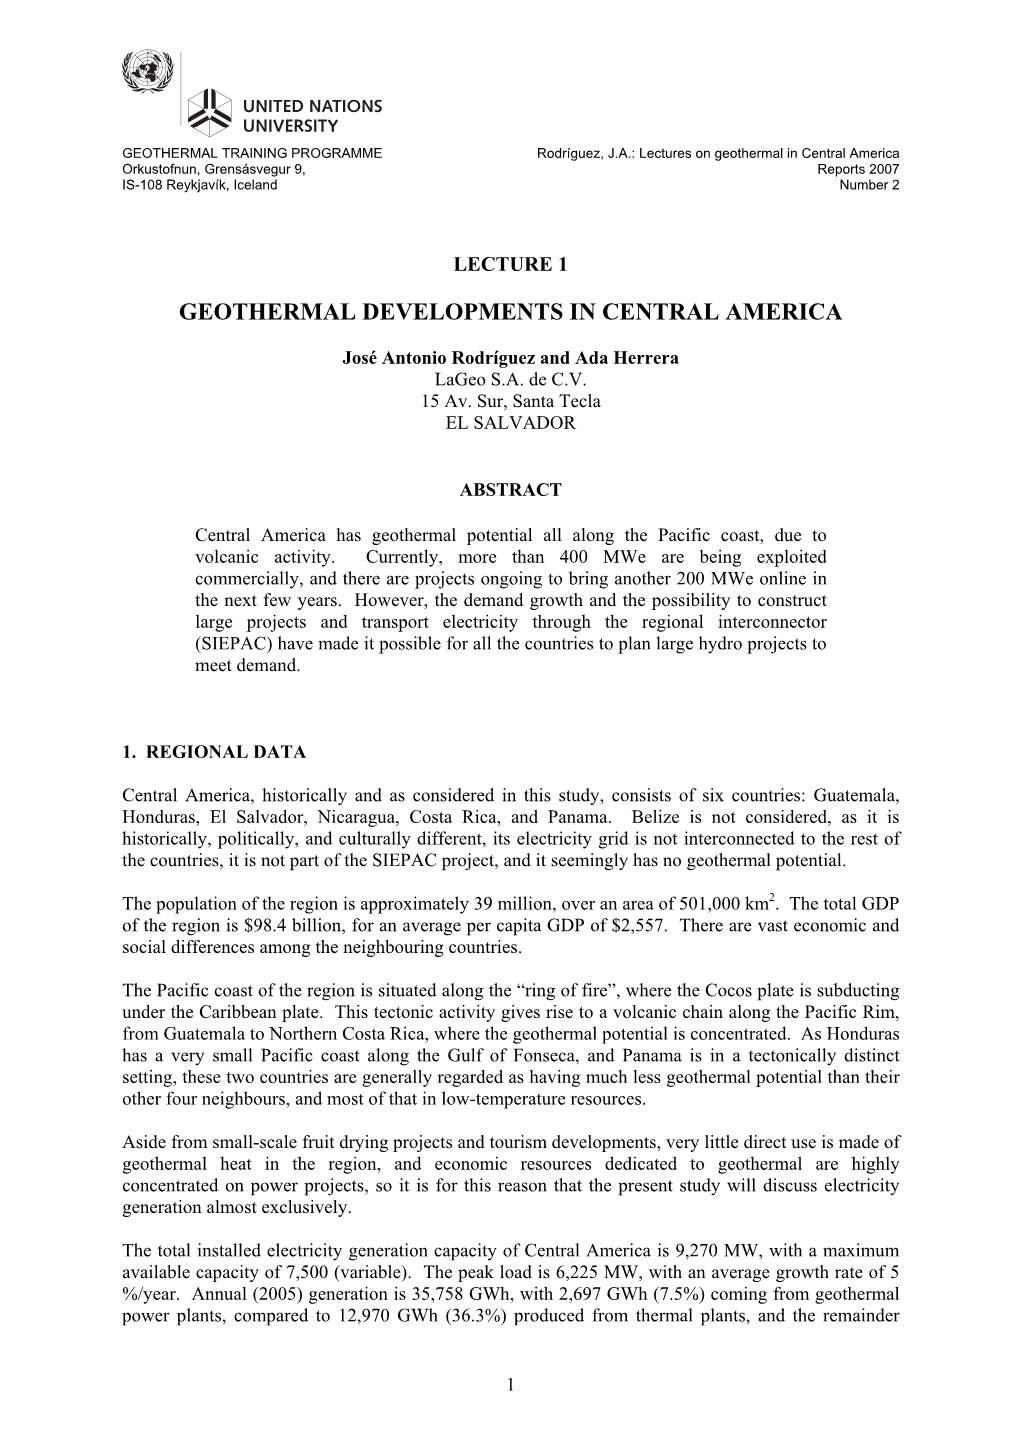 Geothermal Developments in Central America